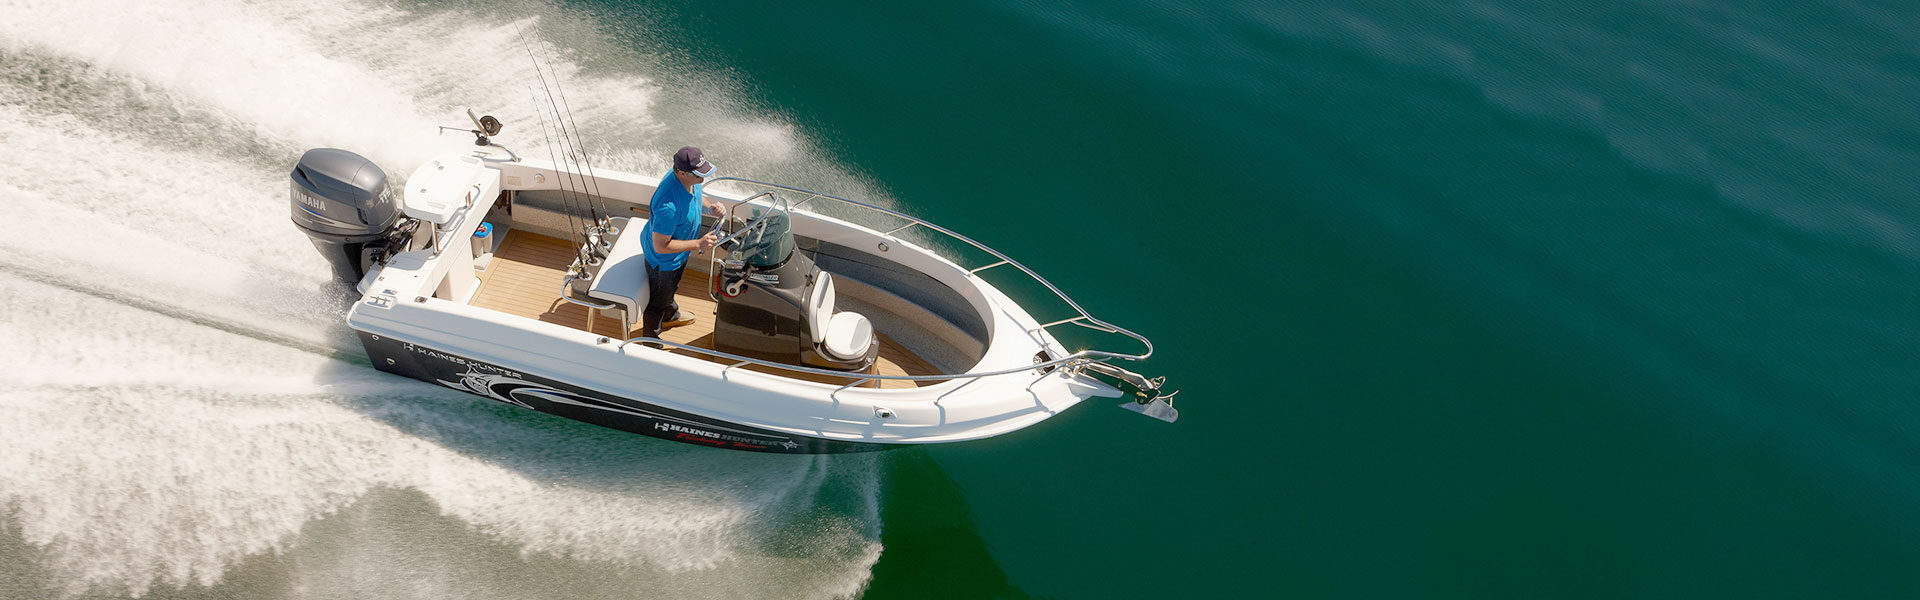 Haines Hunter 565 – An Affordable Offshore Package